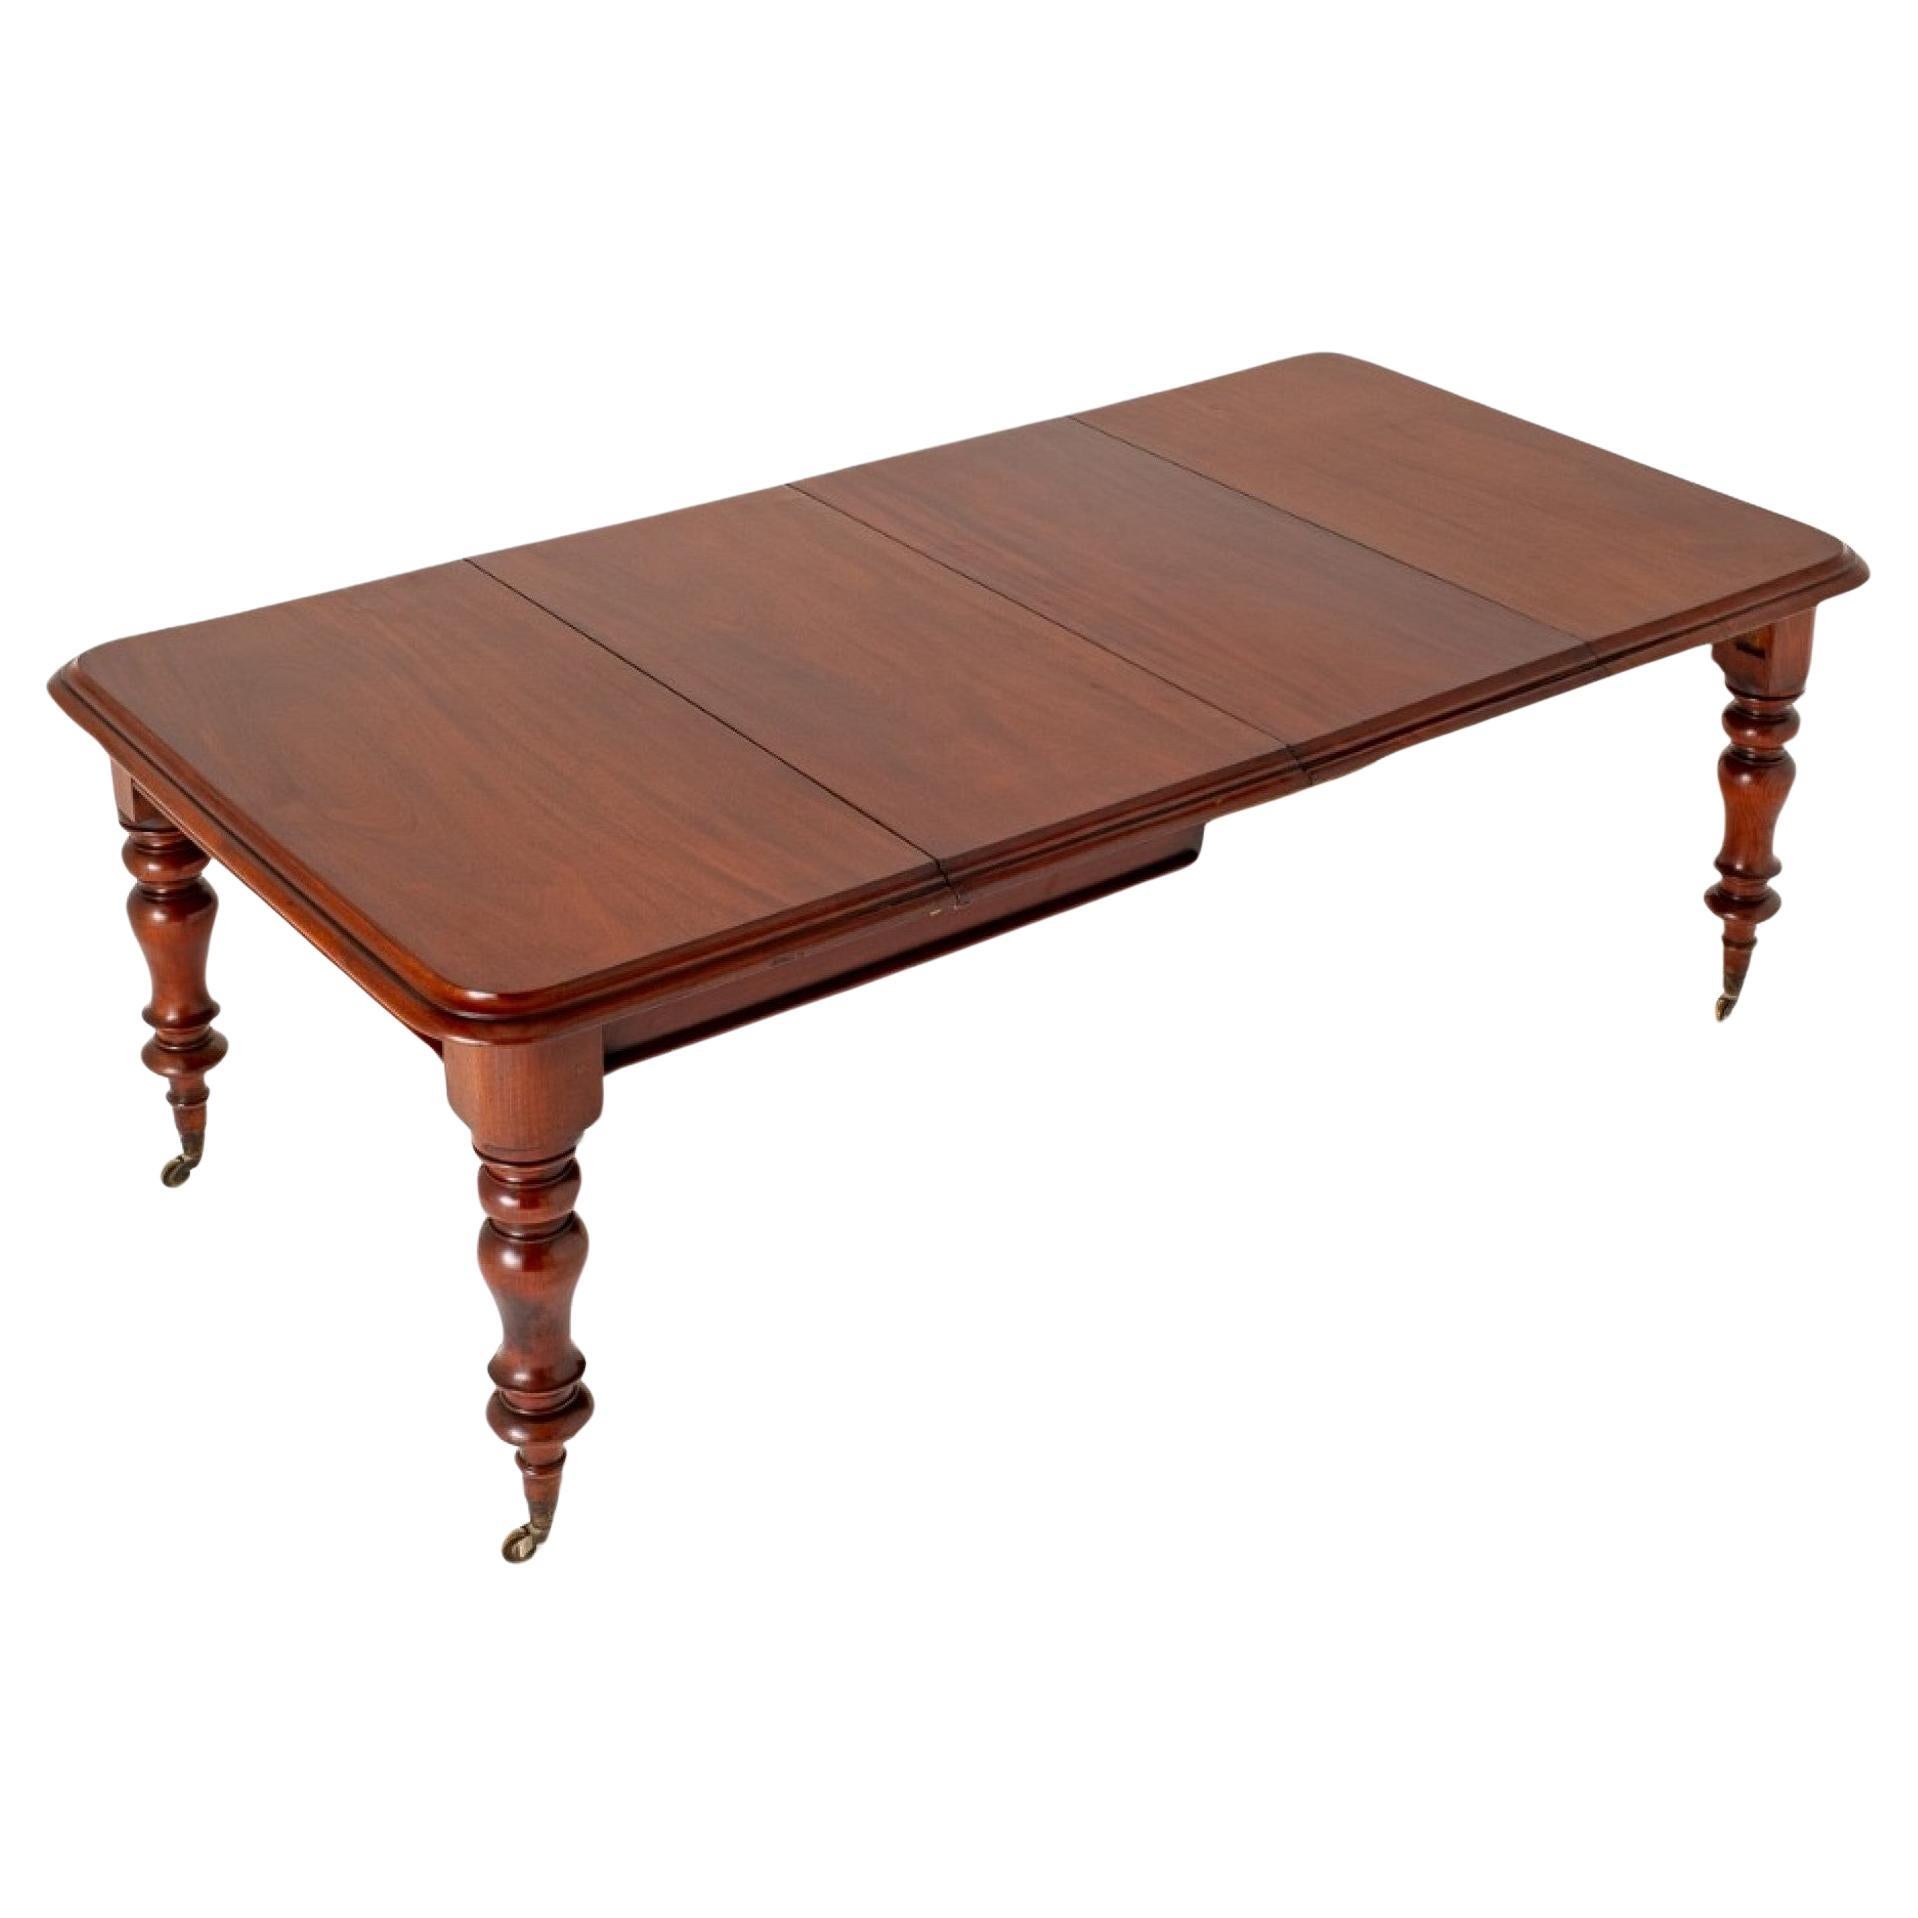 Victorian Dining Table Mahogany 2 Leaf Extending 1860 For Sale